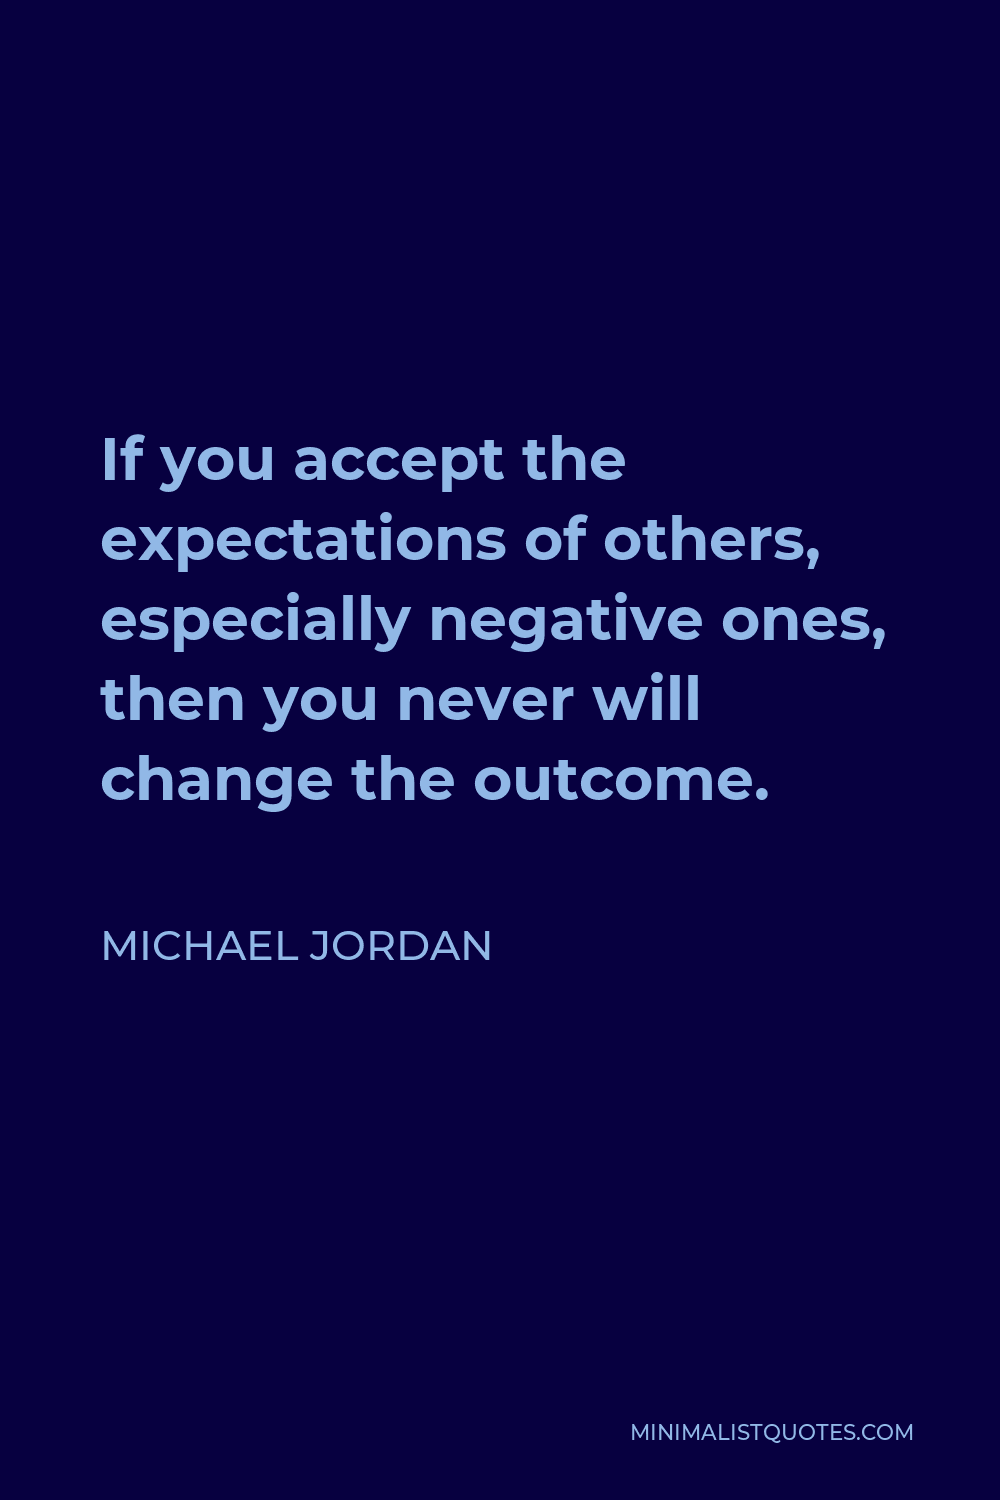 Michael Jordan Quote - If you accept the expectations of others, especially negative ones, then you never will change the outcome.